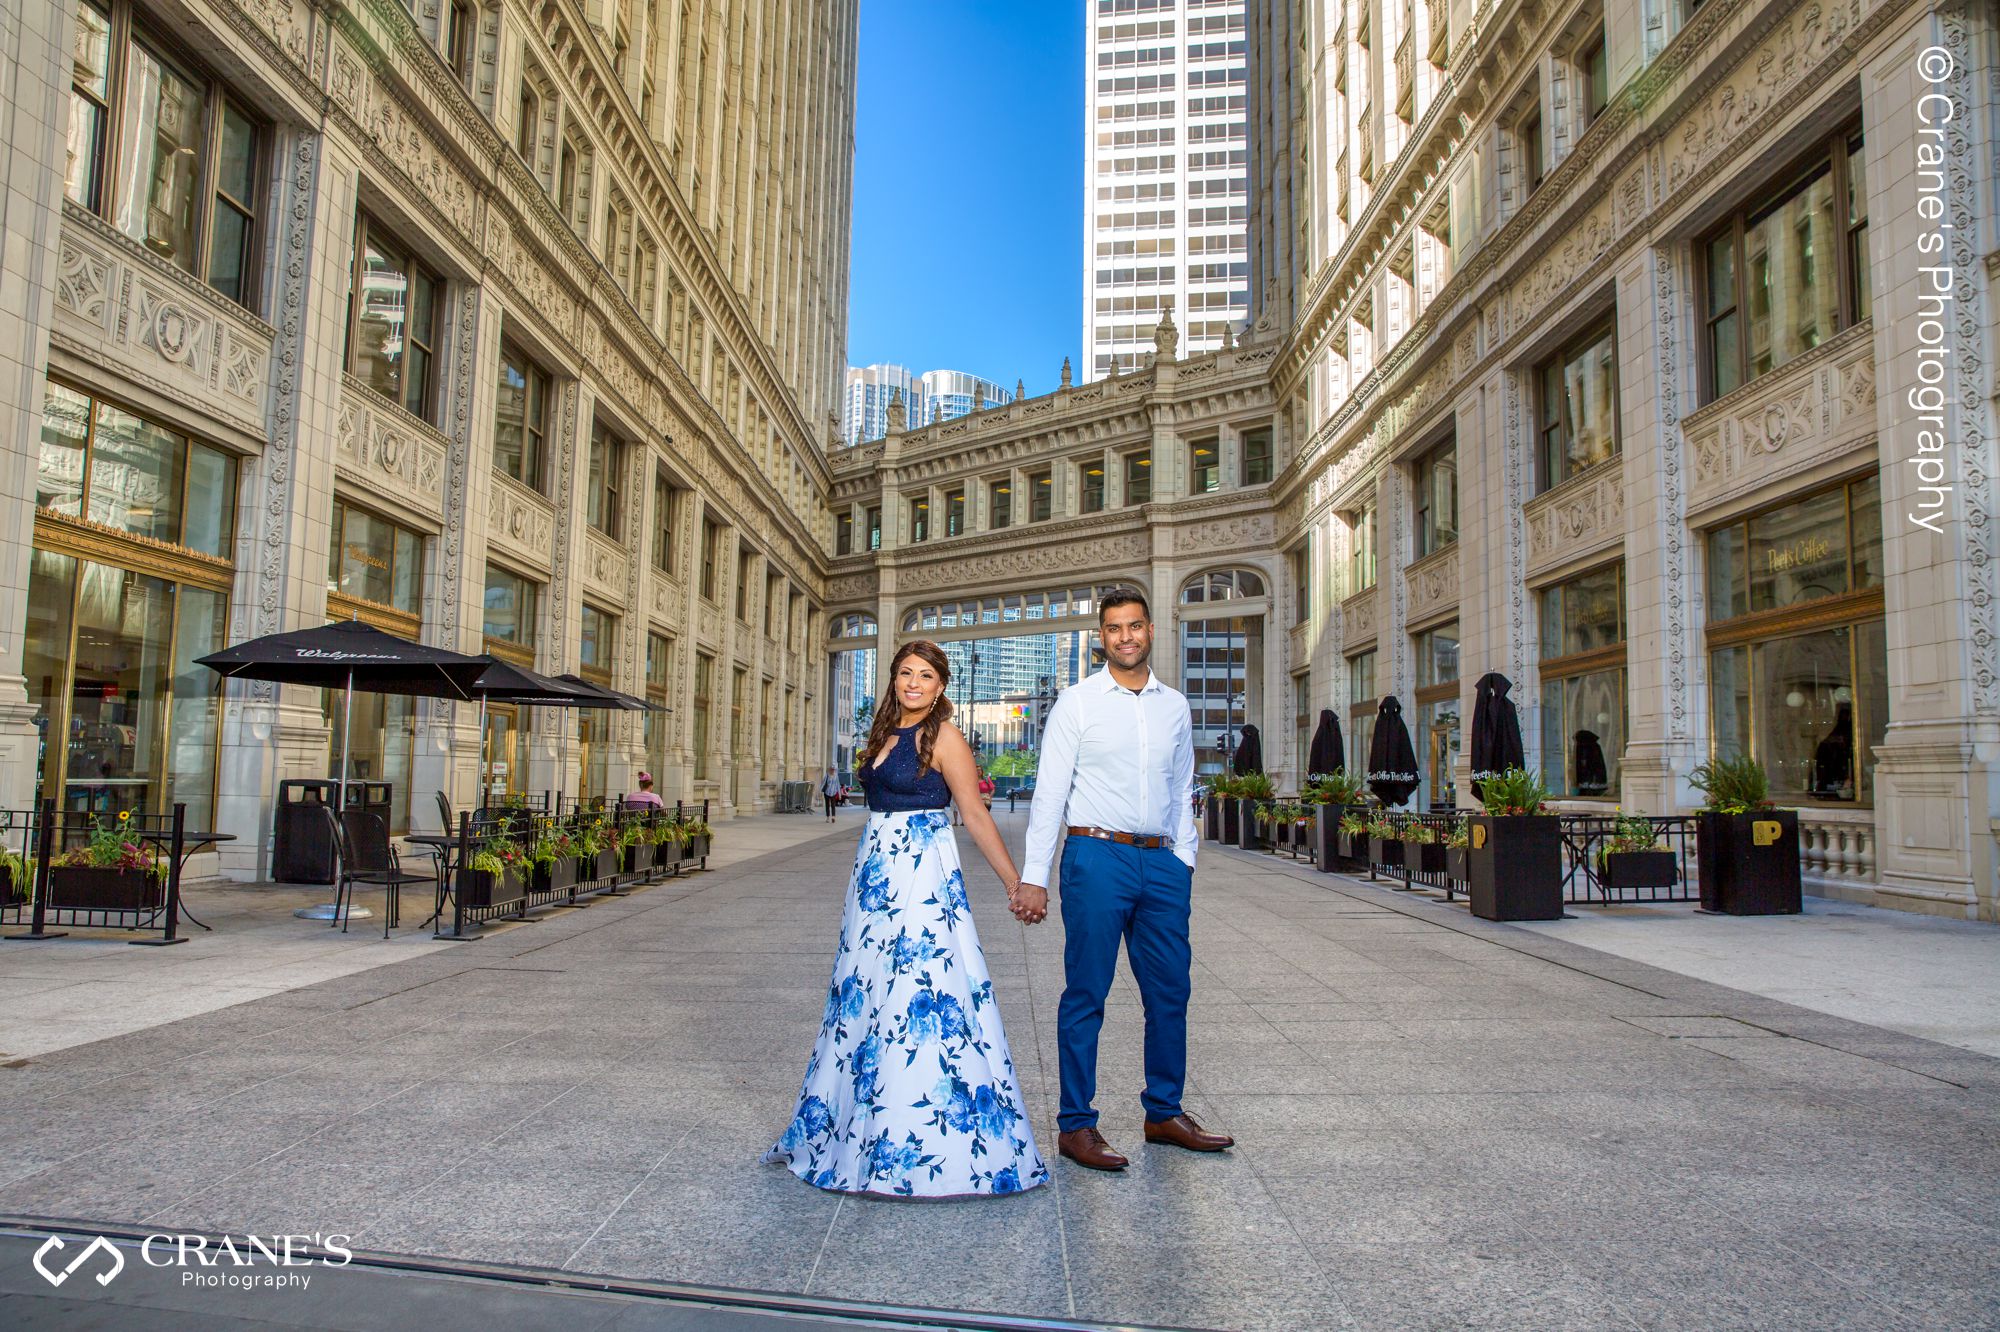 An engaged photo taken near Wrigley Building with the skywalk behind them